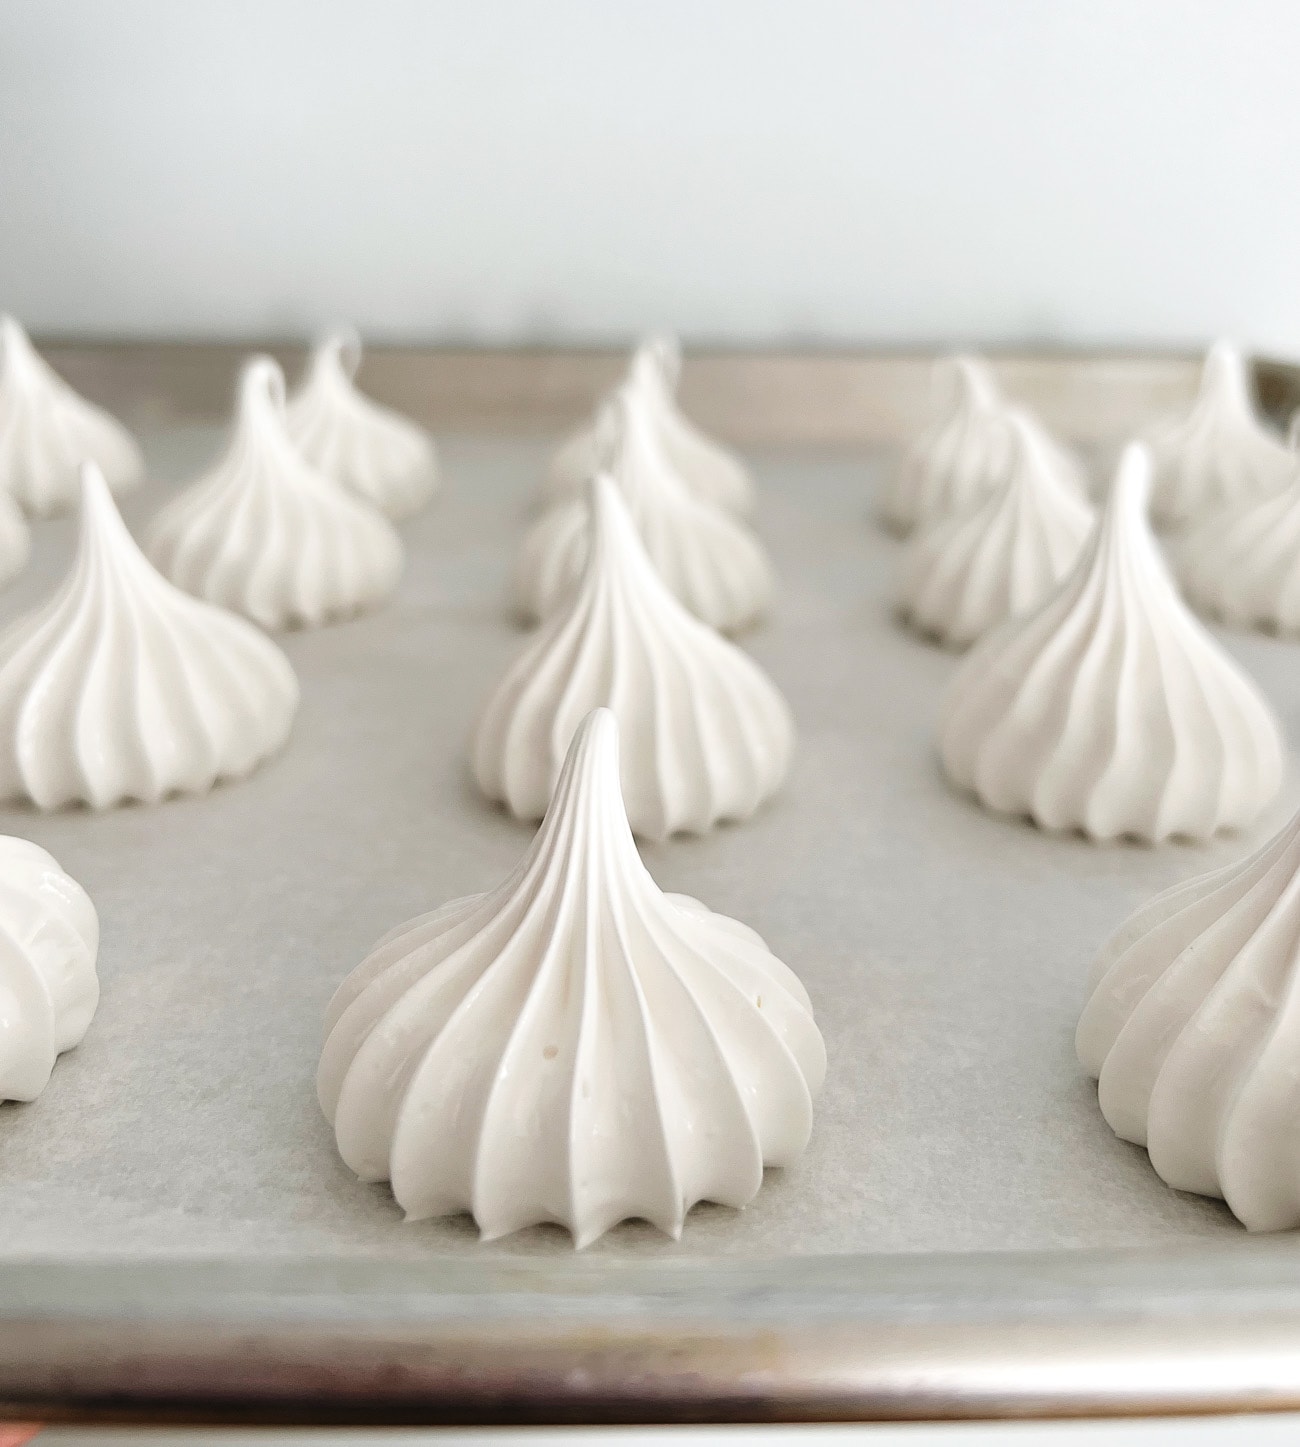 piped meringues on parchment